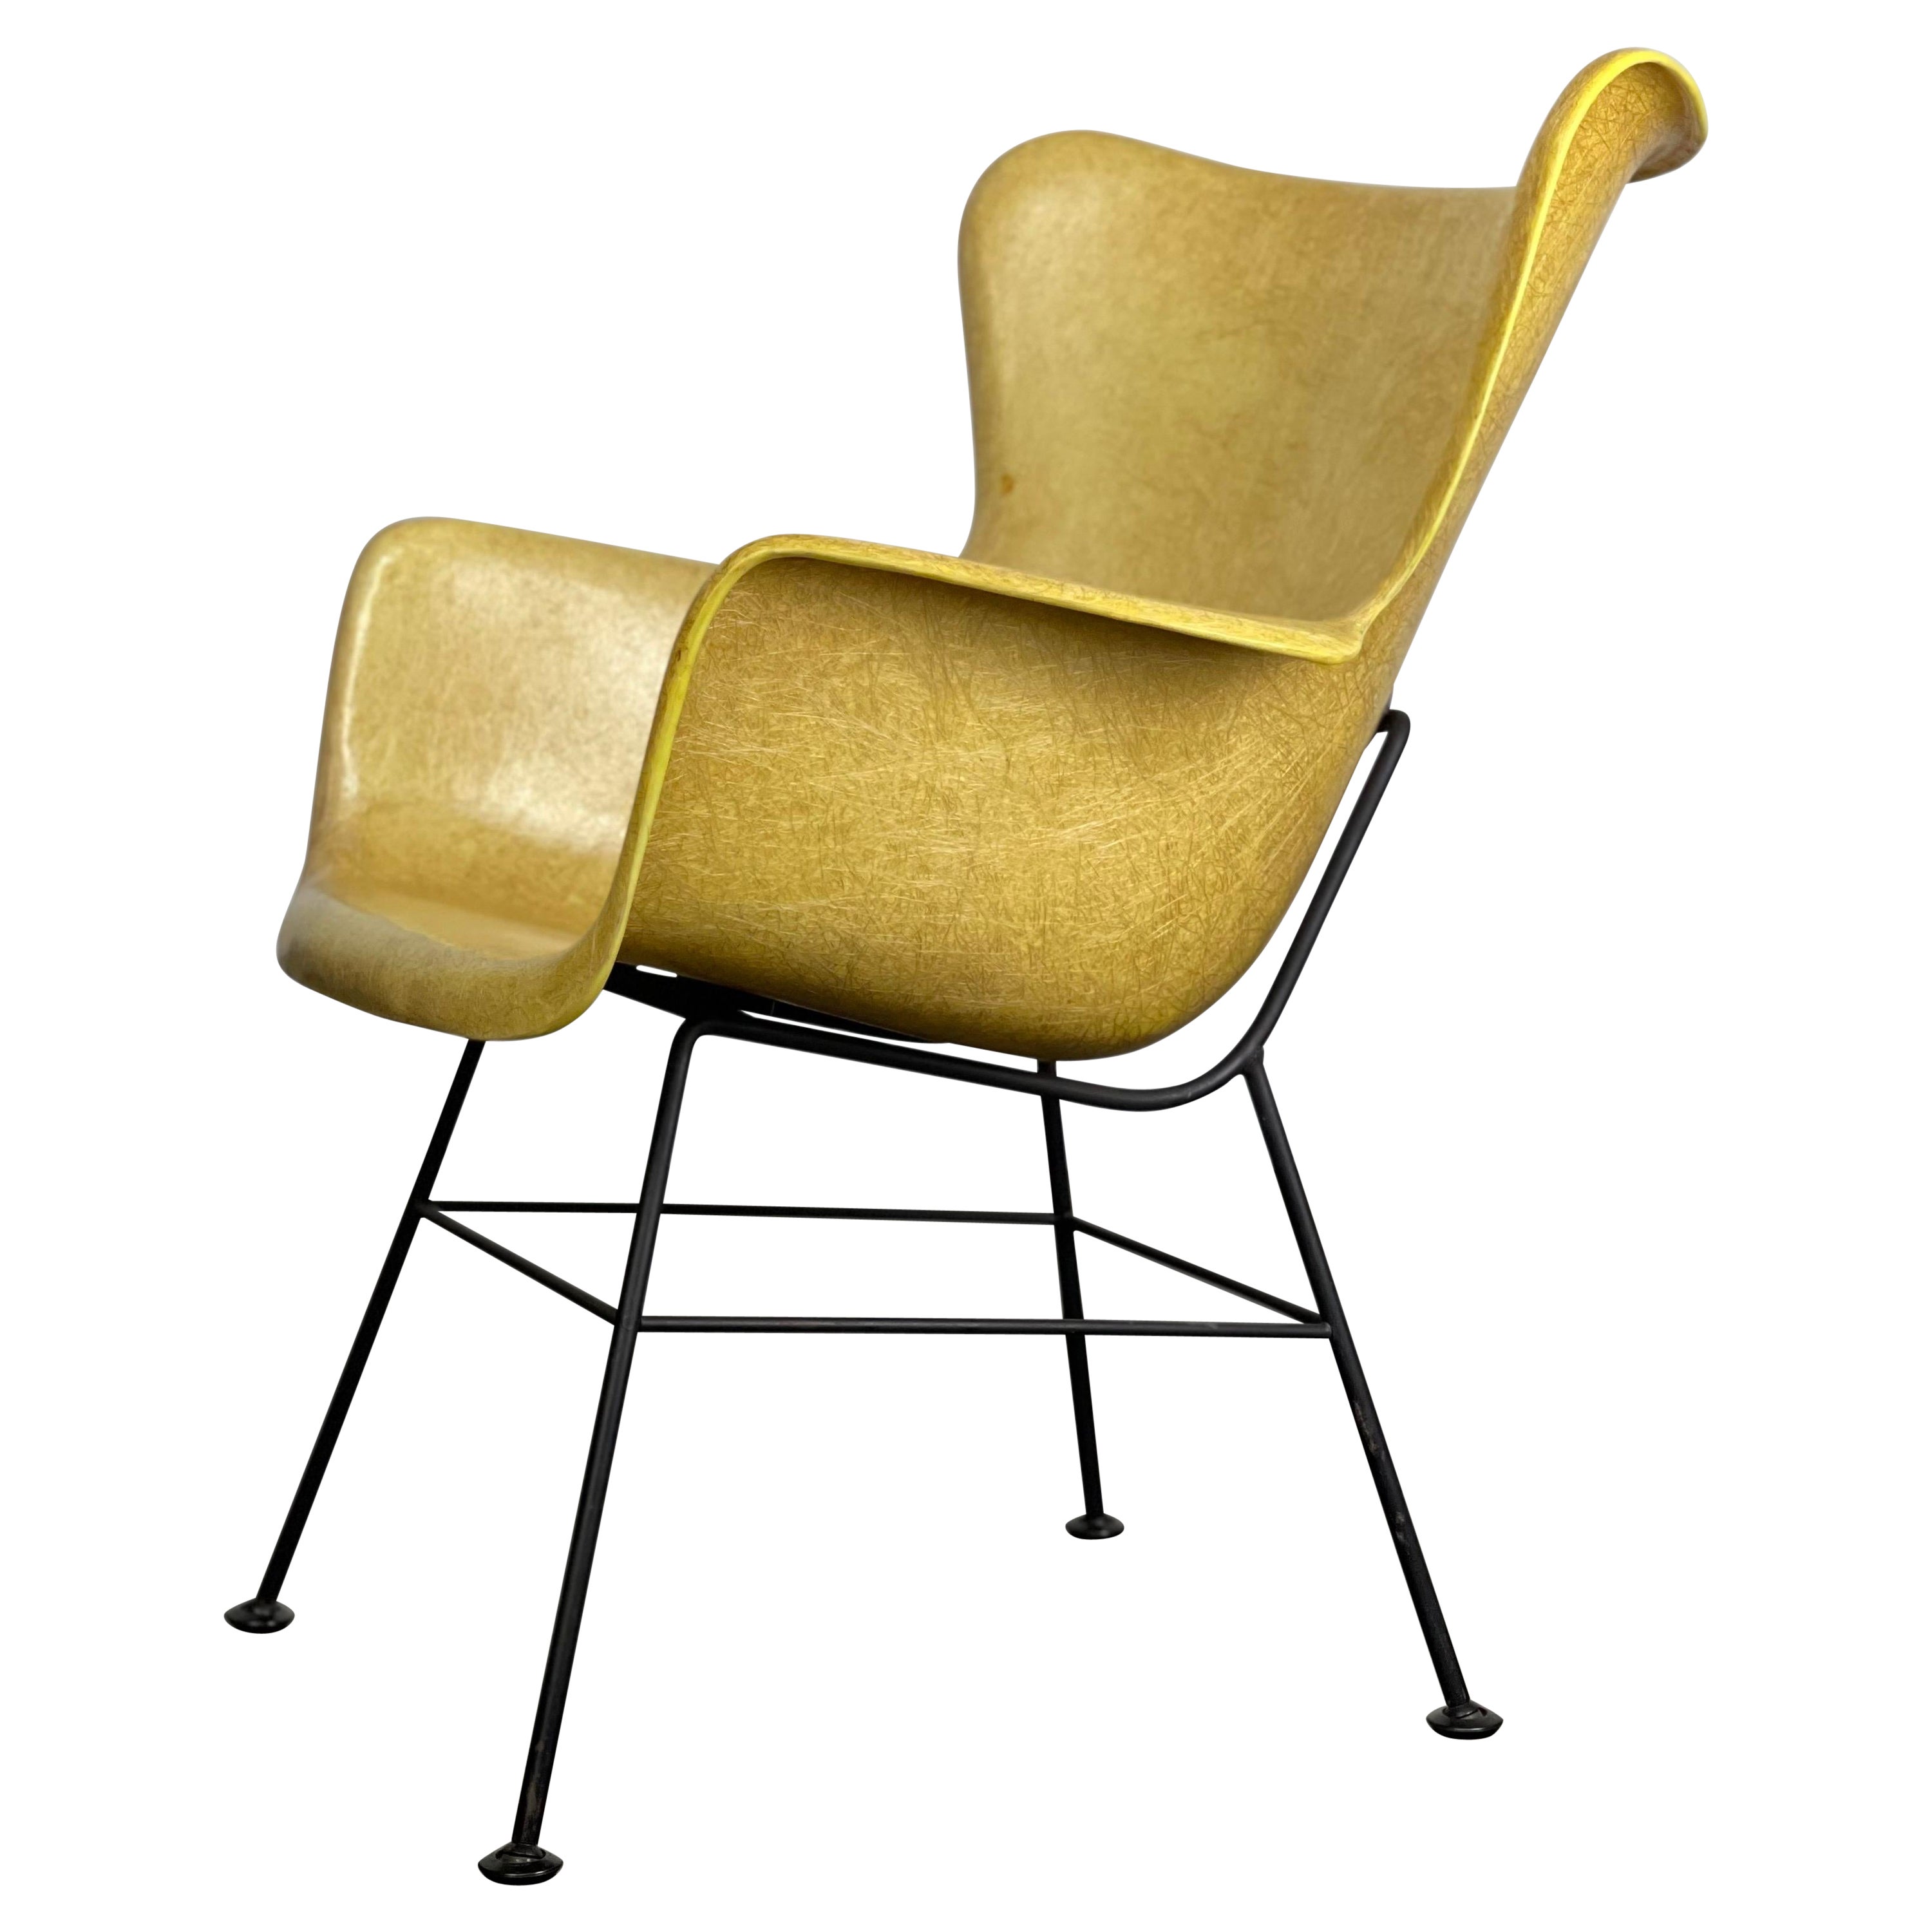 Mid-Century Modern Sculptural Lounge Chair by Lawrence Peabody for Selig Labeled